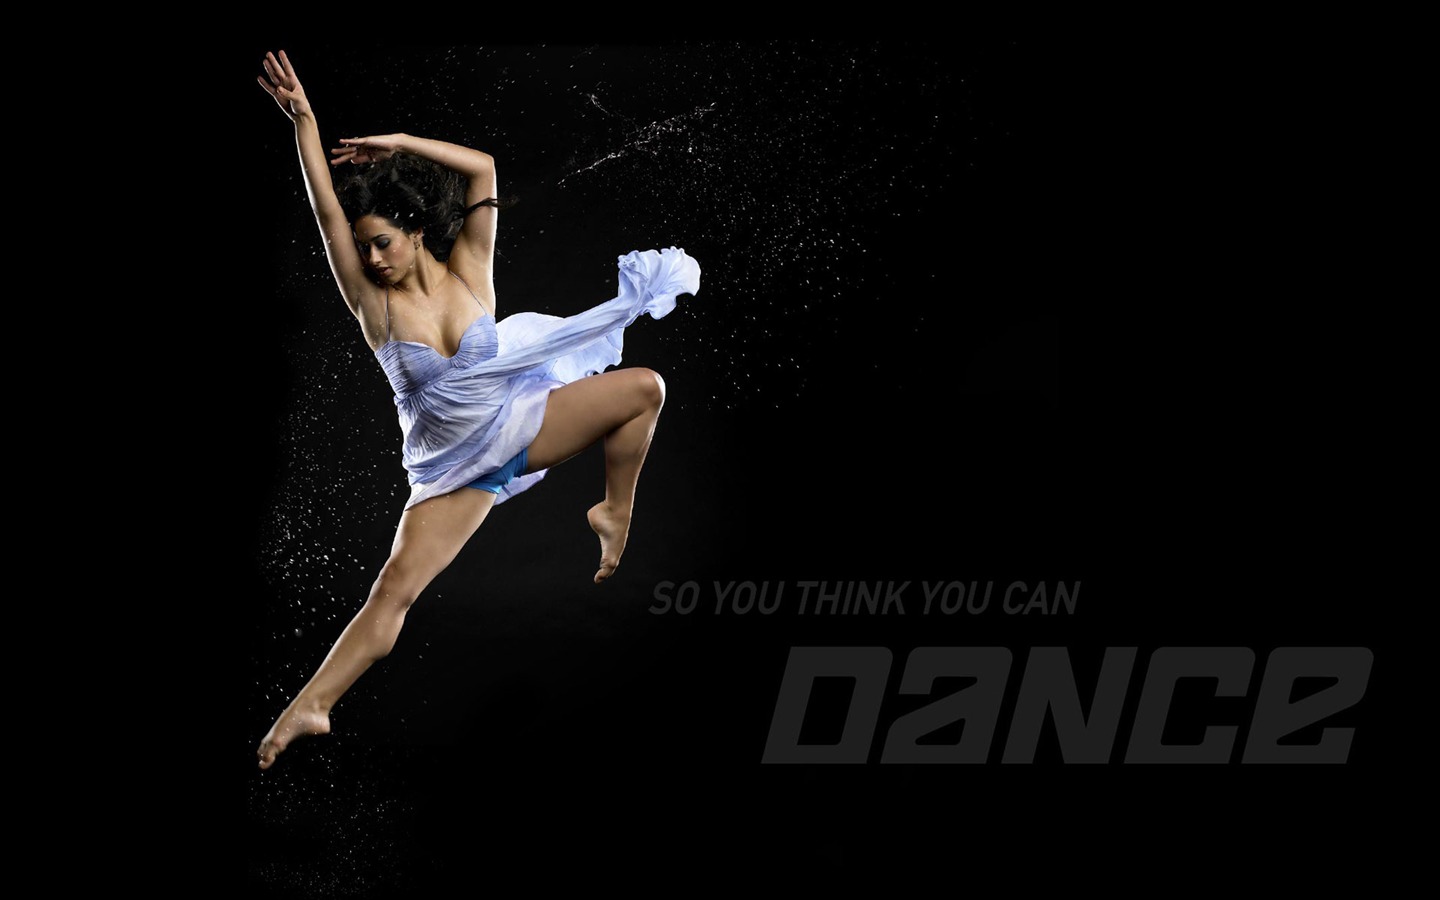 So You Think You Can Dance wallpaper (1) #3 - 1440x900